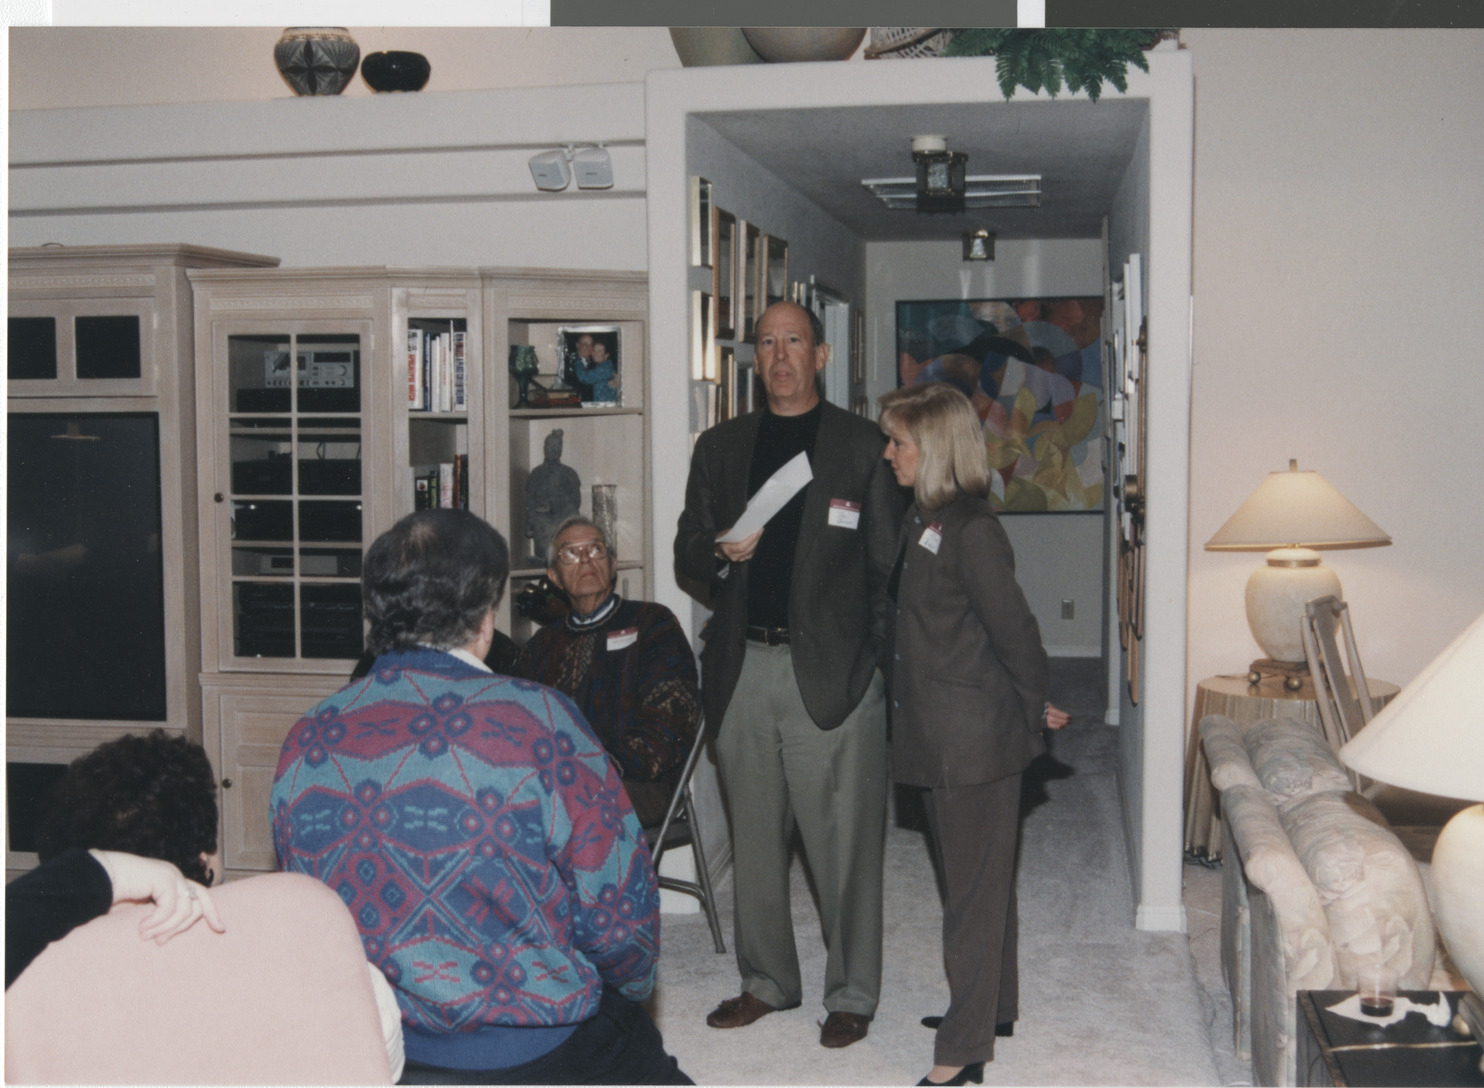 Photograph of outreach event at Stalsers, January 1999